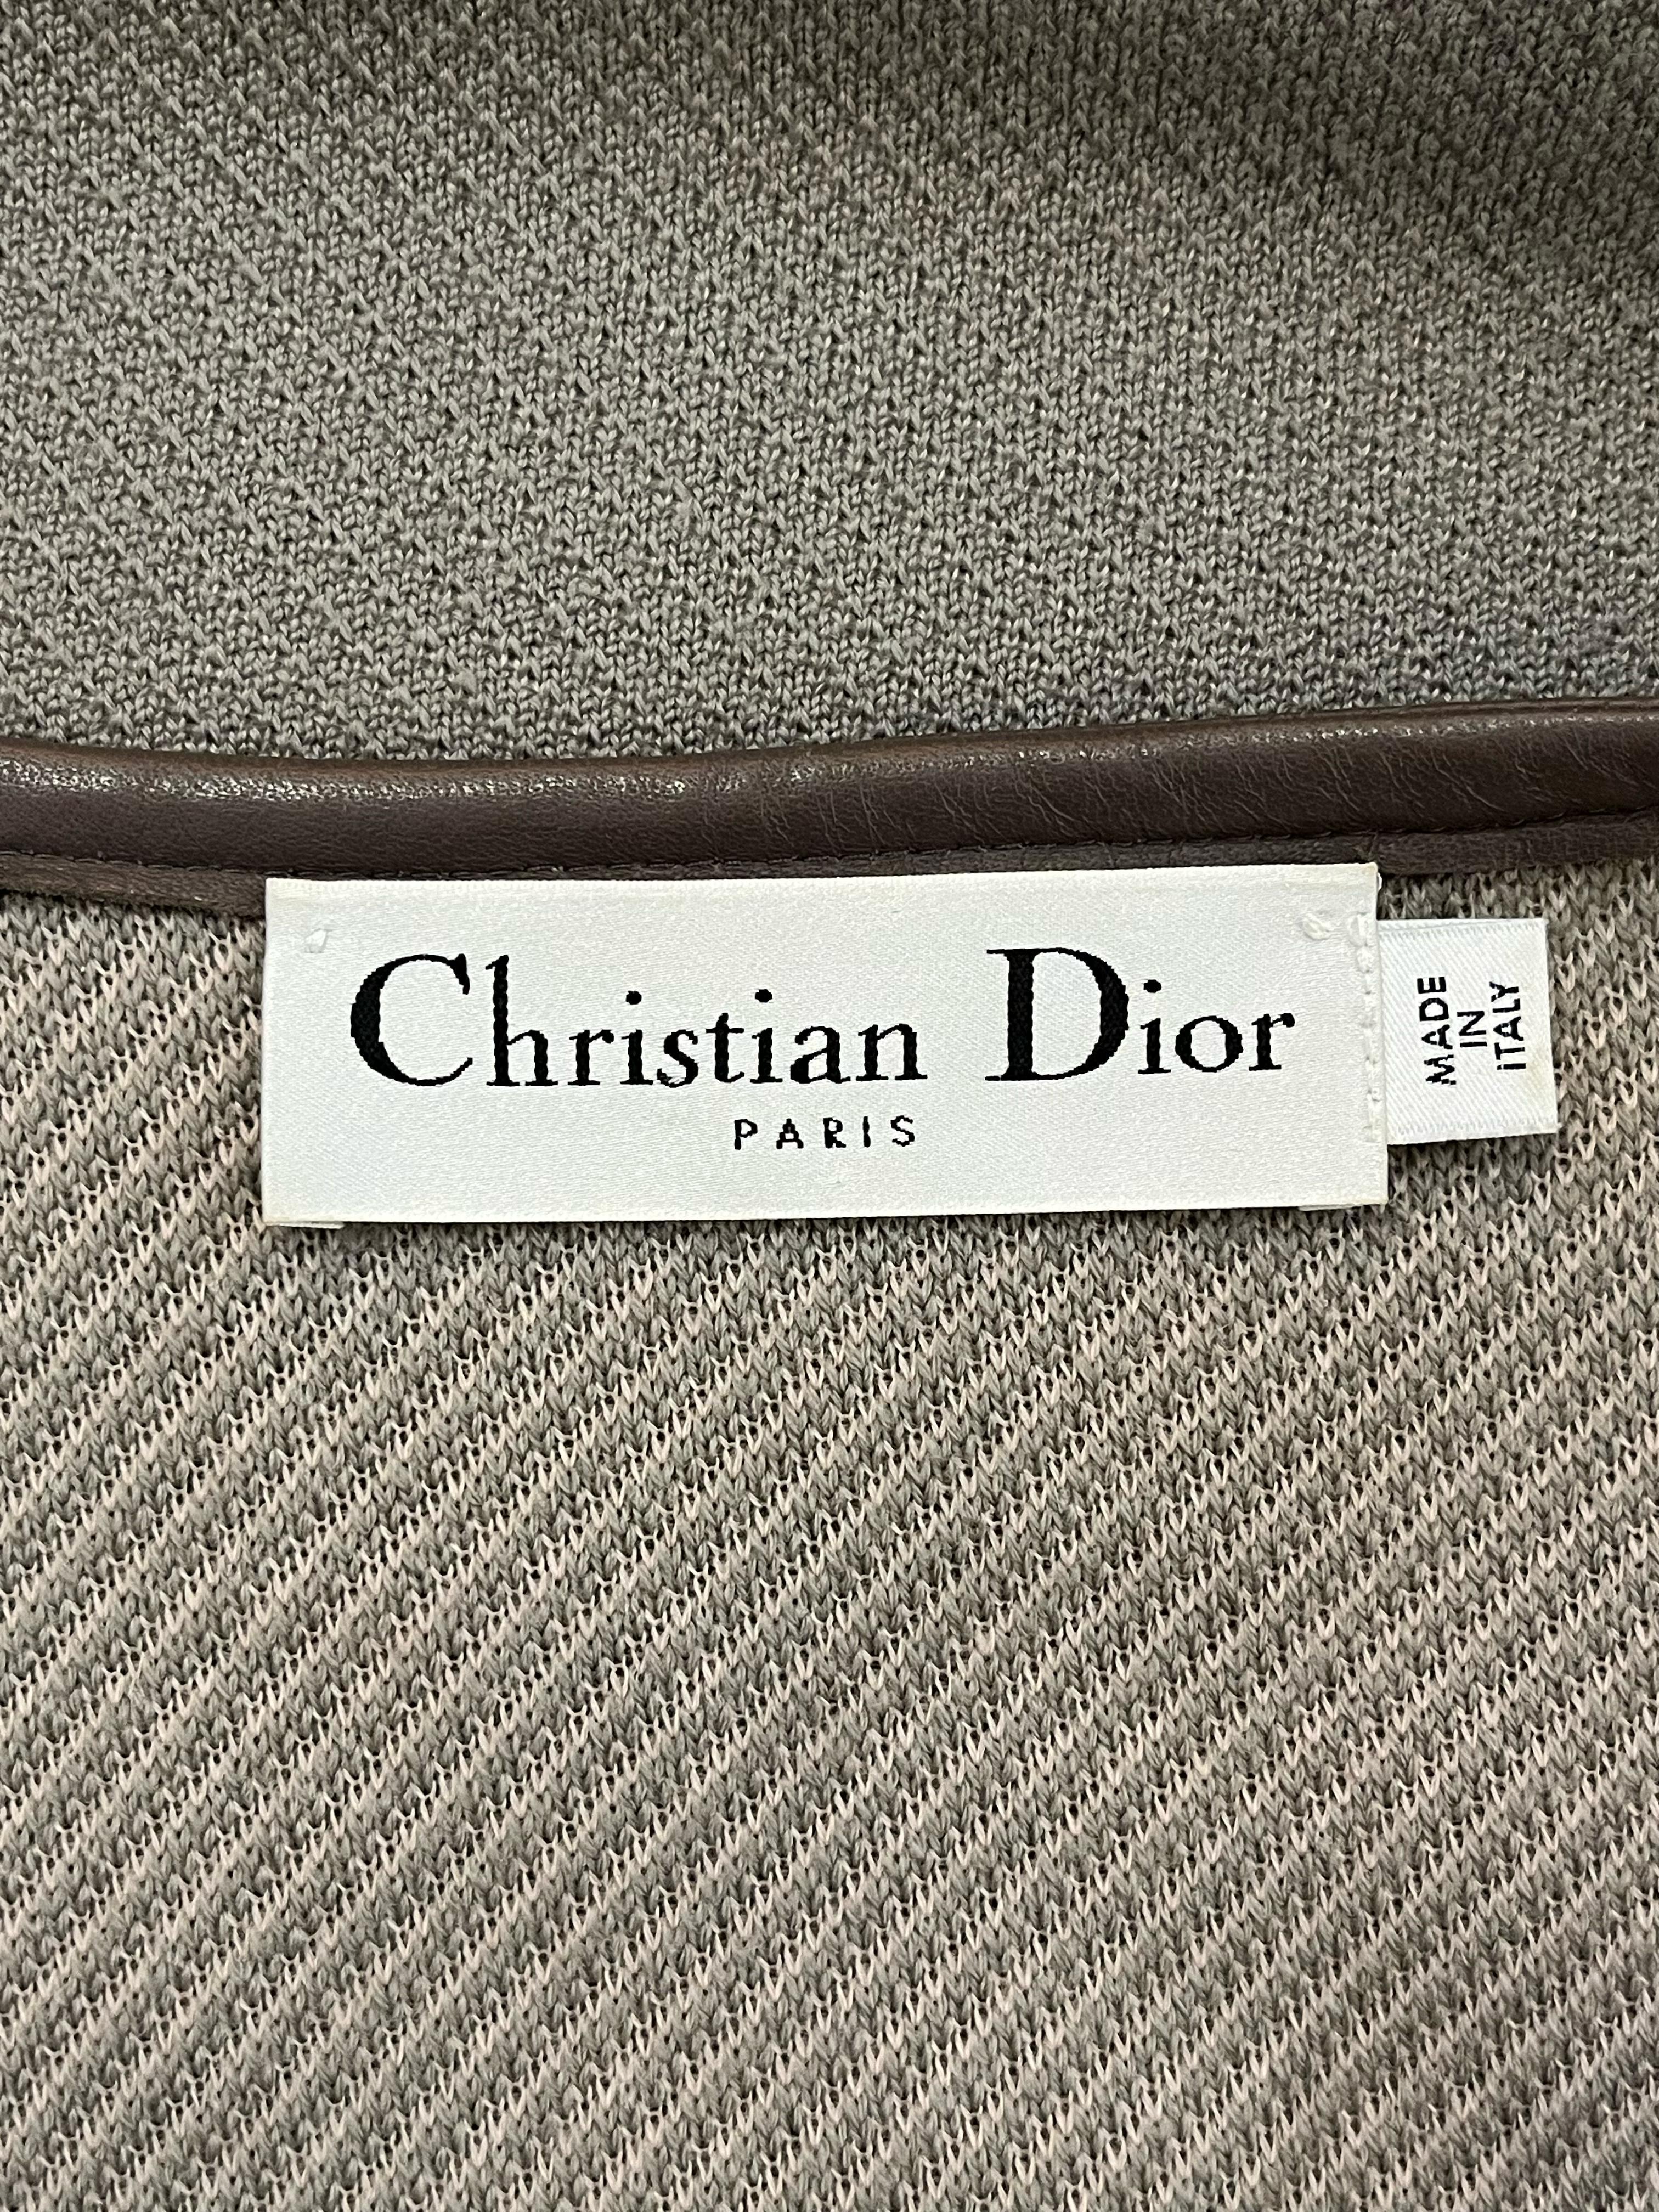 Christian Dior Wool Coat/Cardigan With Leather Trim For Sale 3